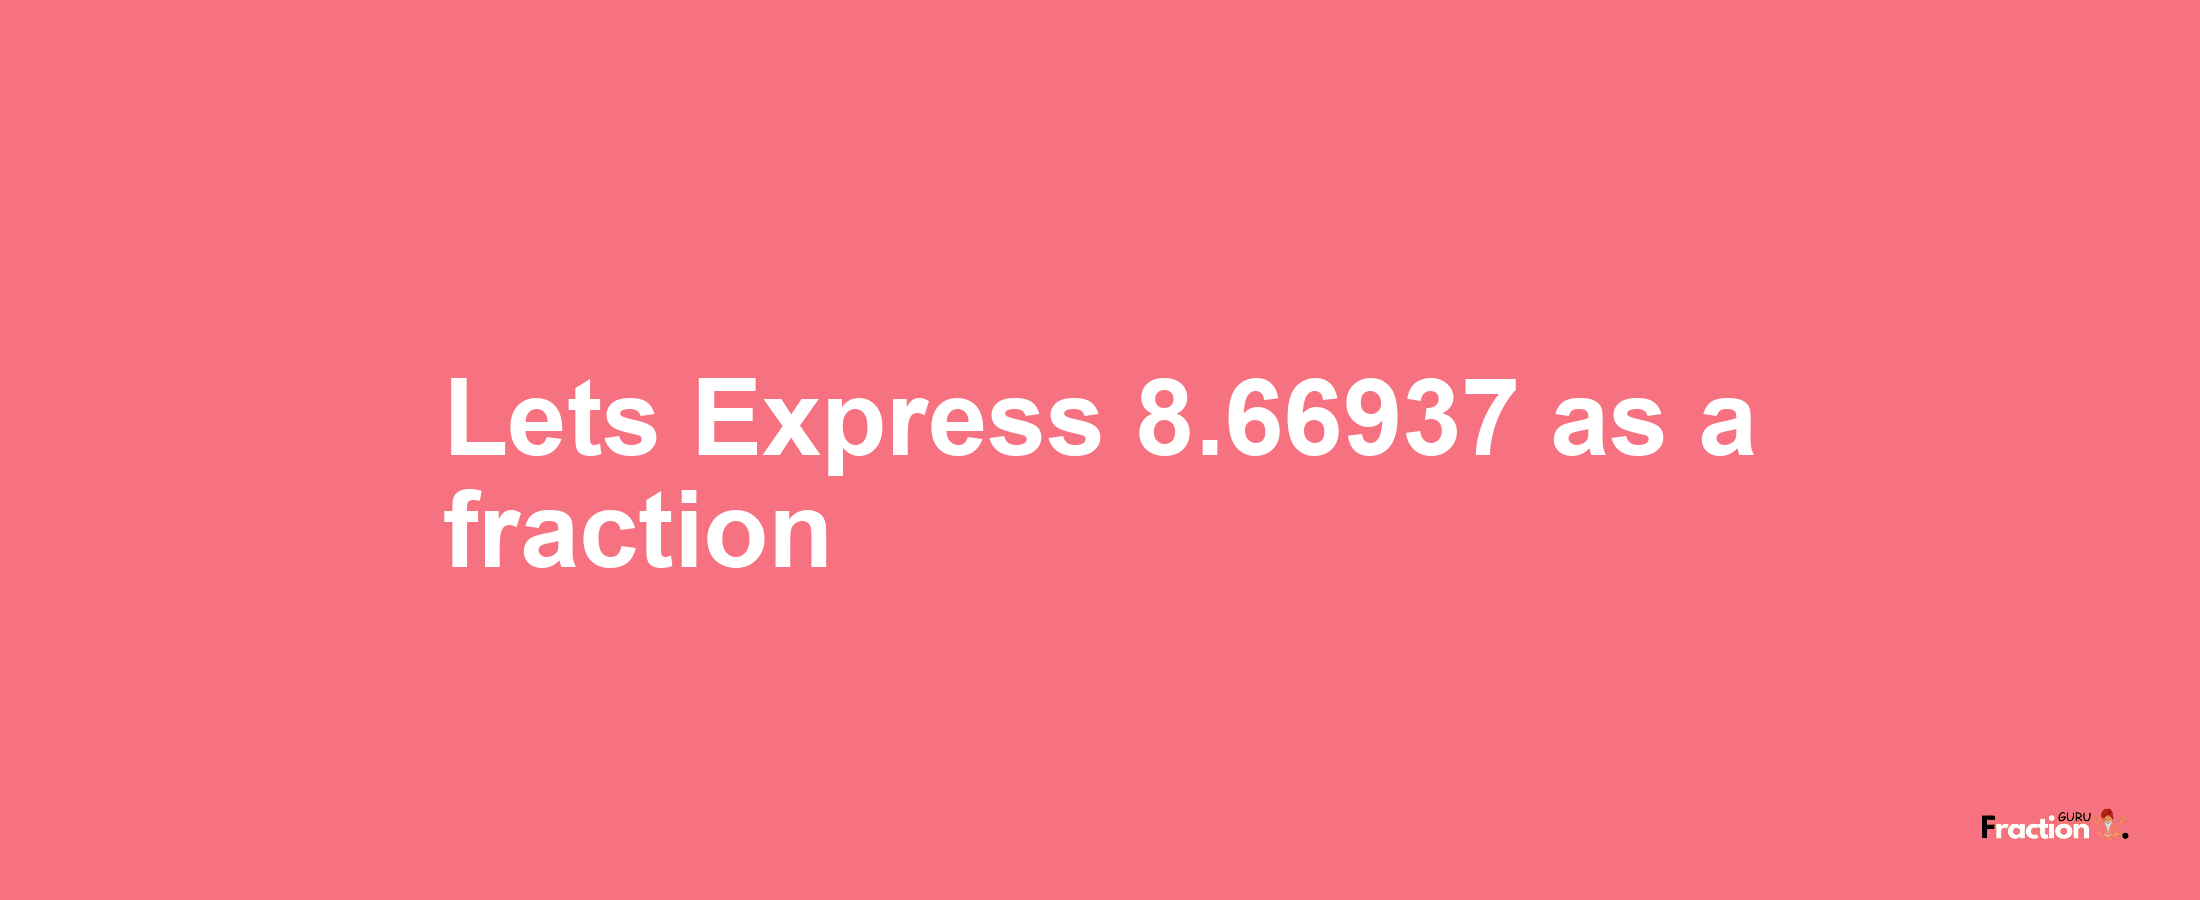 Lets Express 8.66937 as afraction